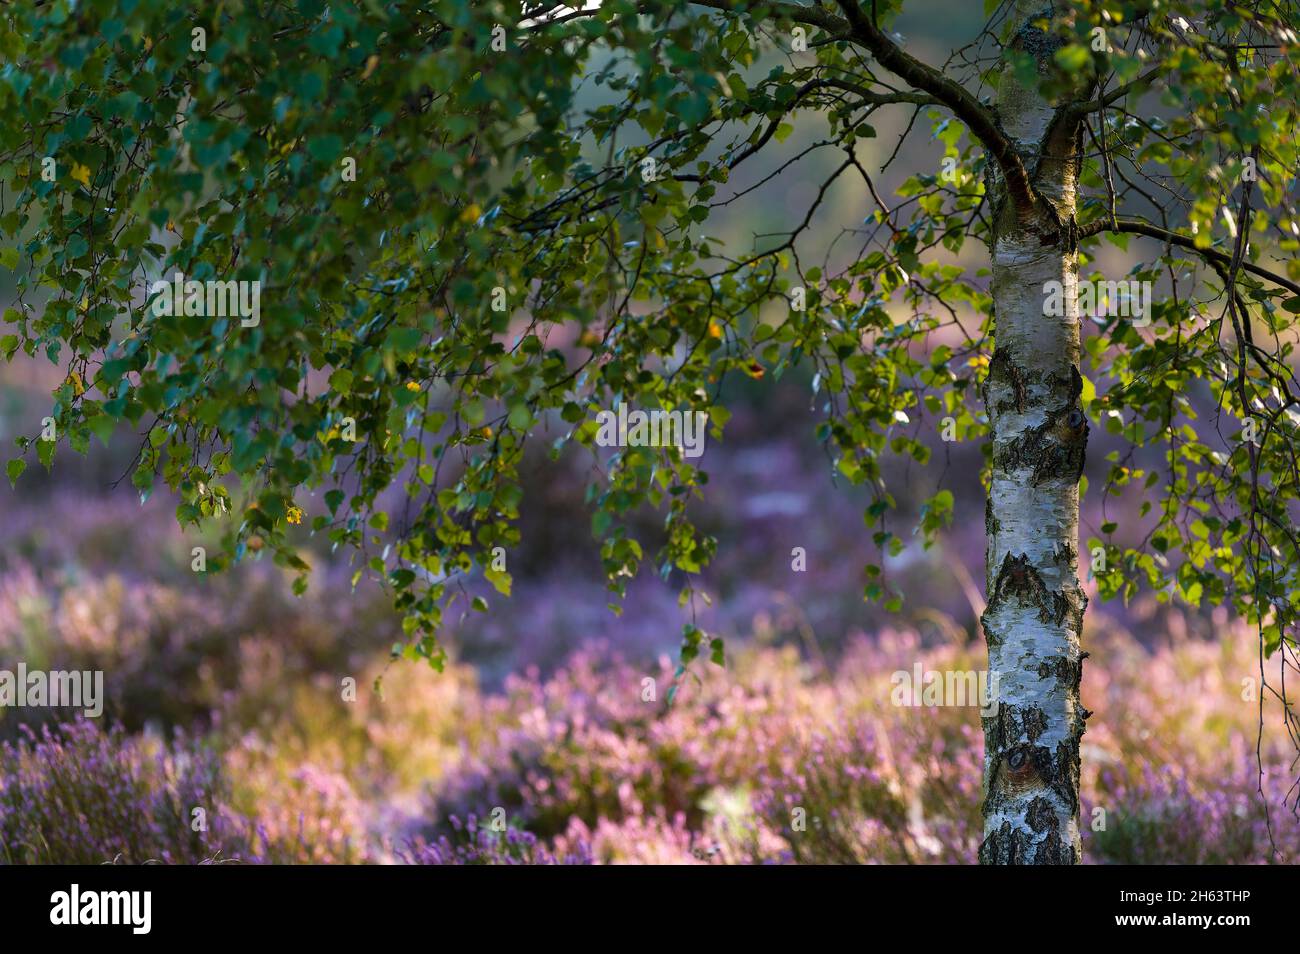 single birch in the heather,in the background the flowers of the common heather glow in the sunlight,morning mood in the behringer heide,nature reserve near behringen near bispingen,lüneburg heath nature park,germany,lower saxony Stock Photo